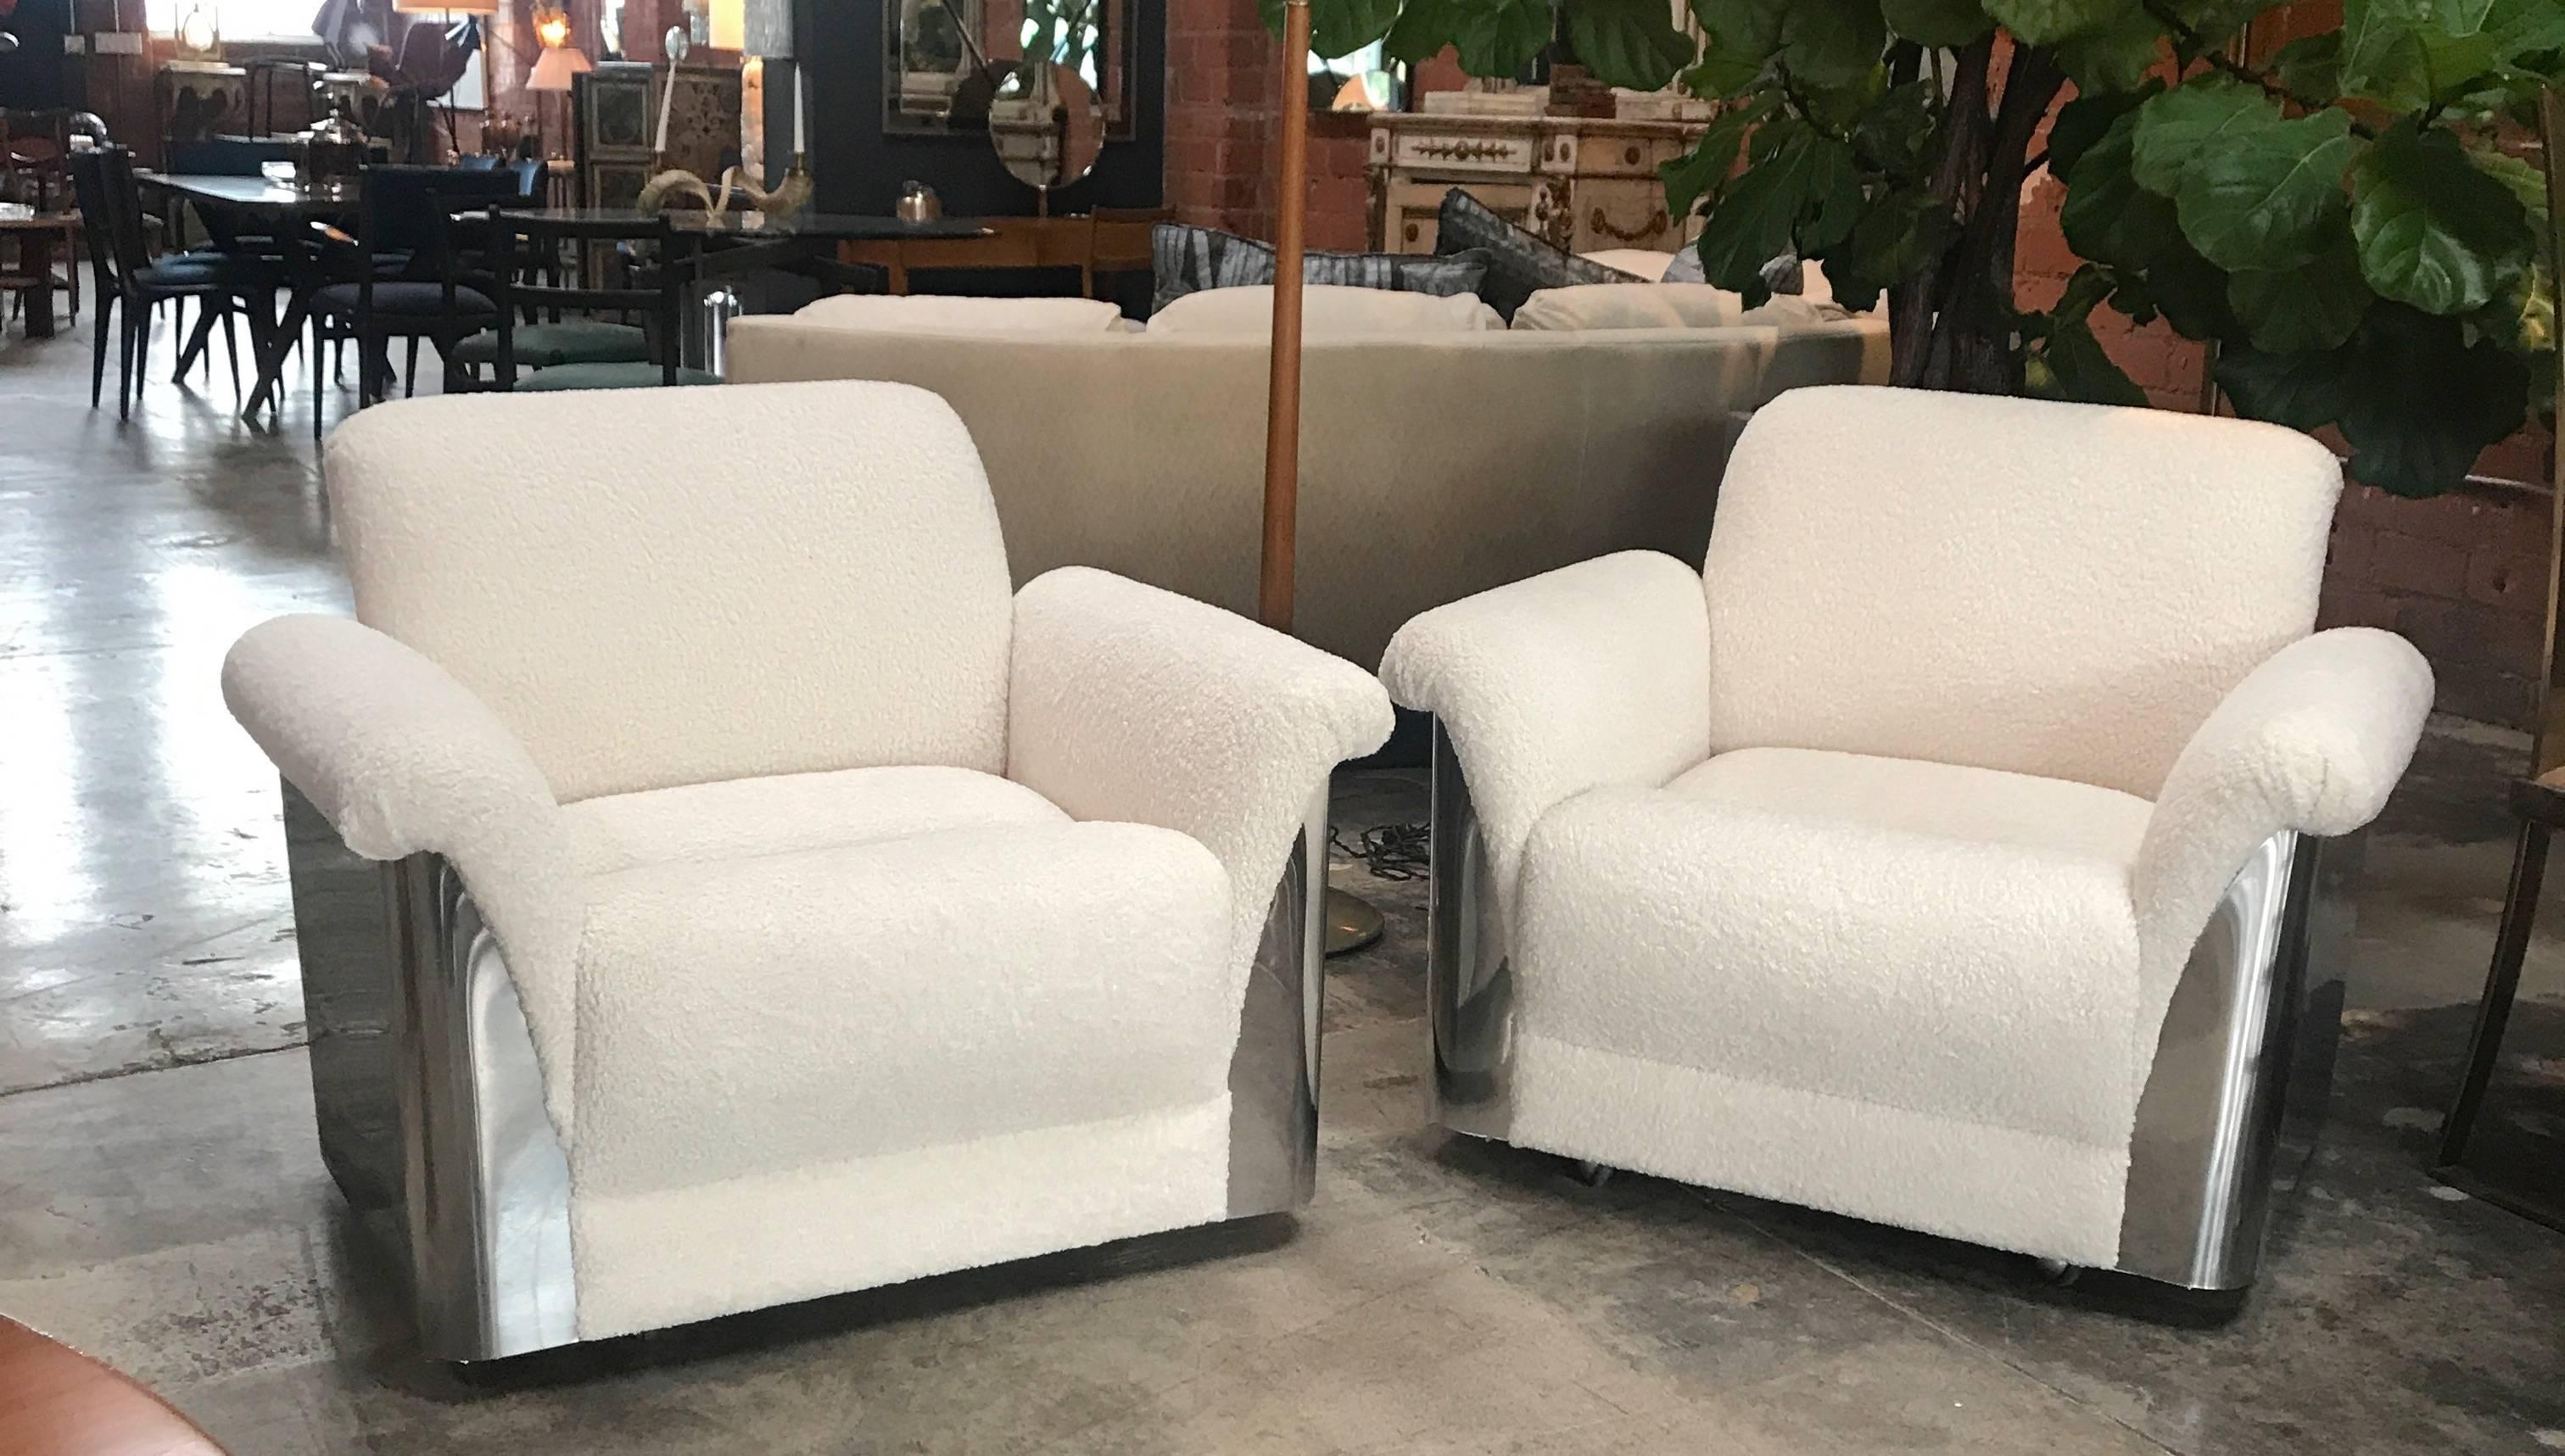 Bellissime Italian armchairs! With steel; what more could you ask for.
New upholstery.